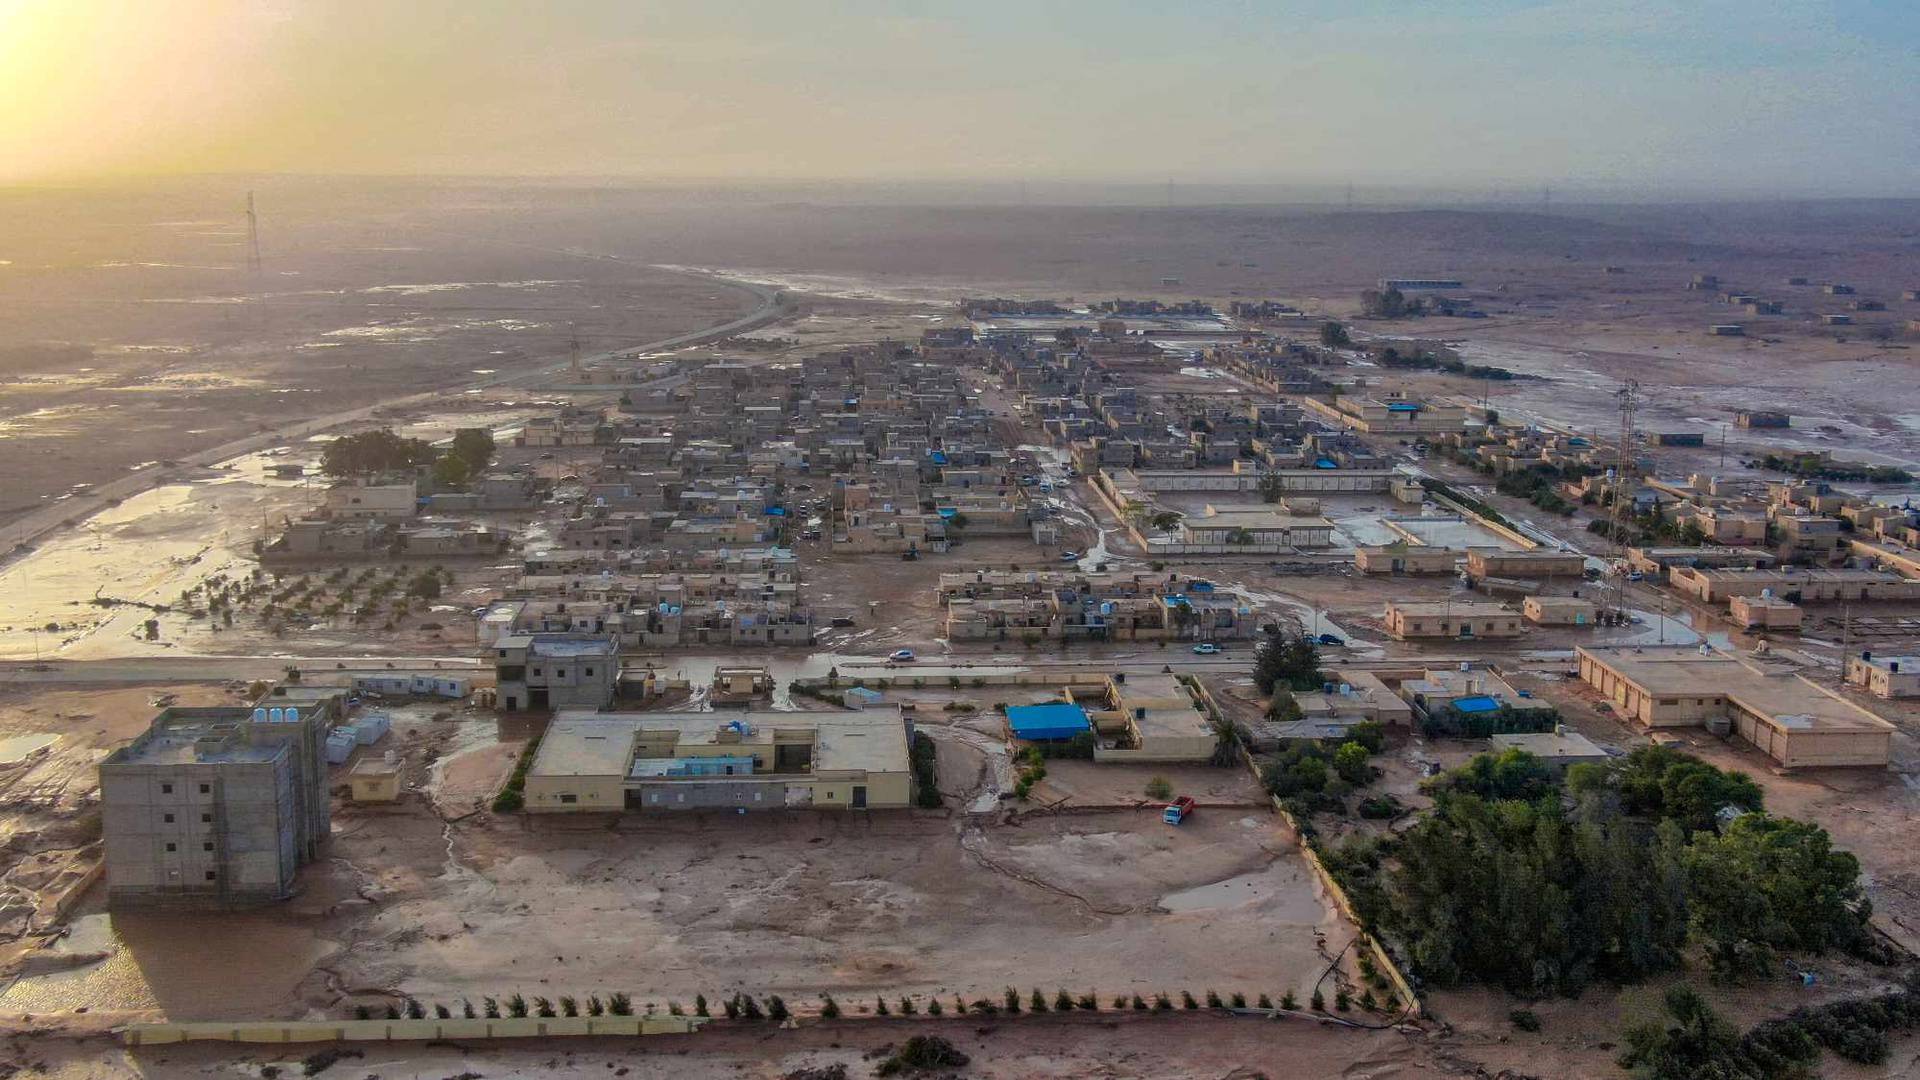 General view of flood water covering the area as a powerful storm and heavy rainfall hit Al-Mukhaili